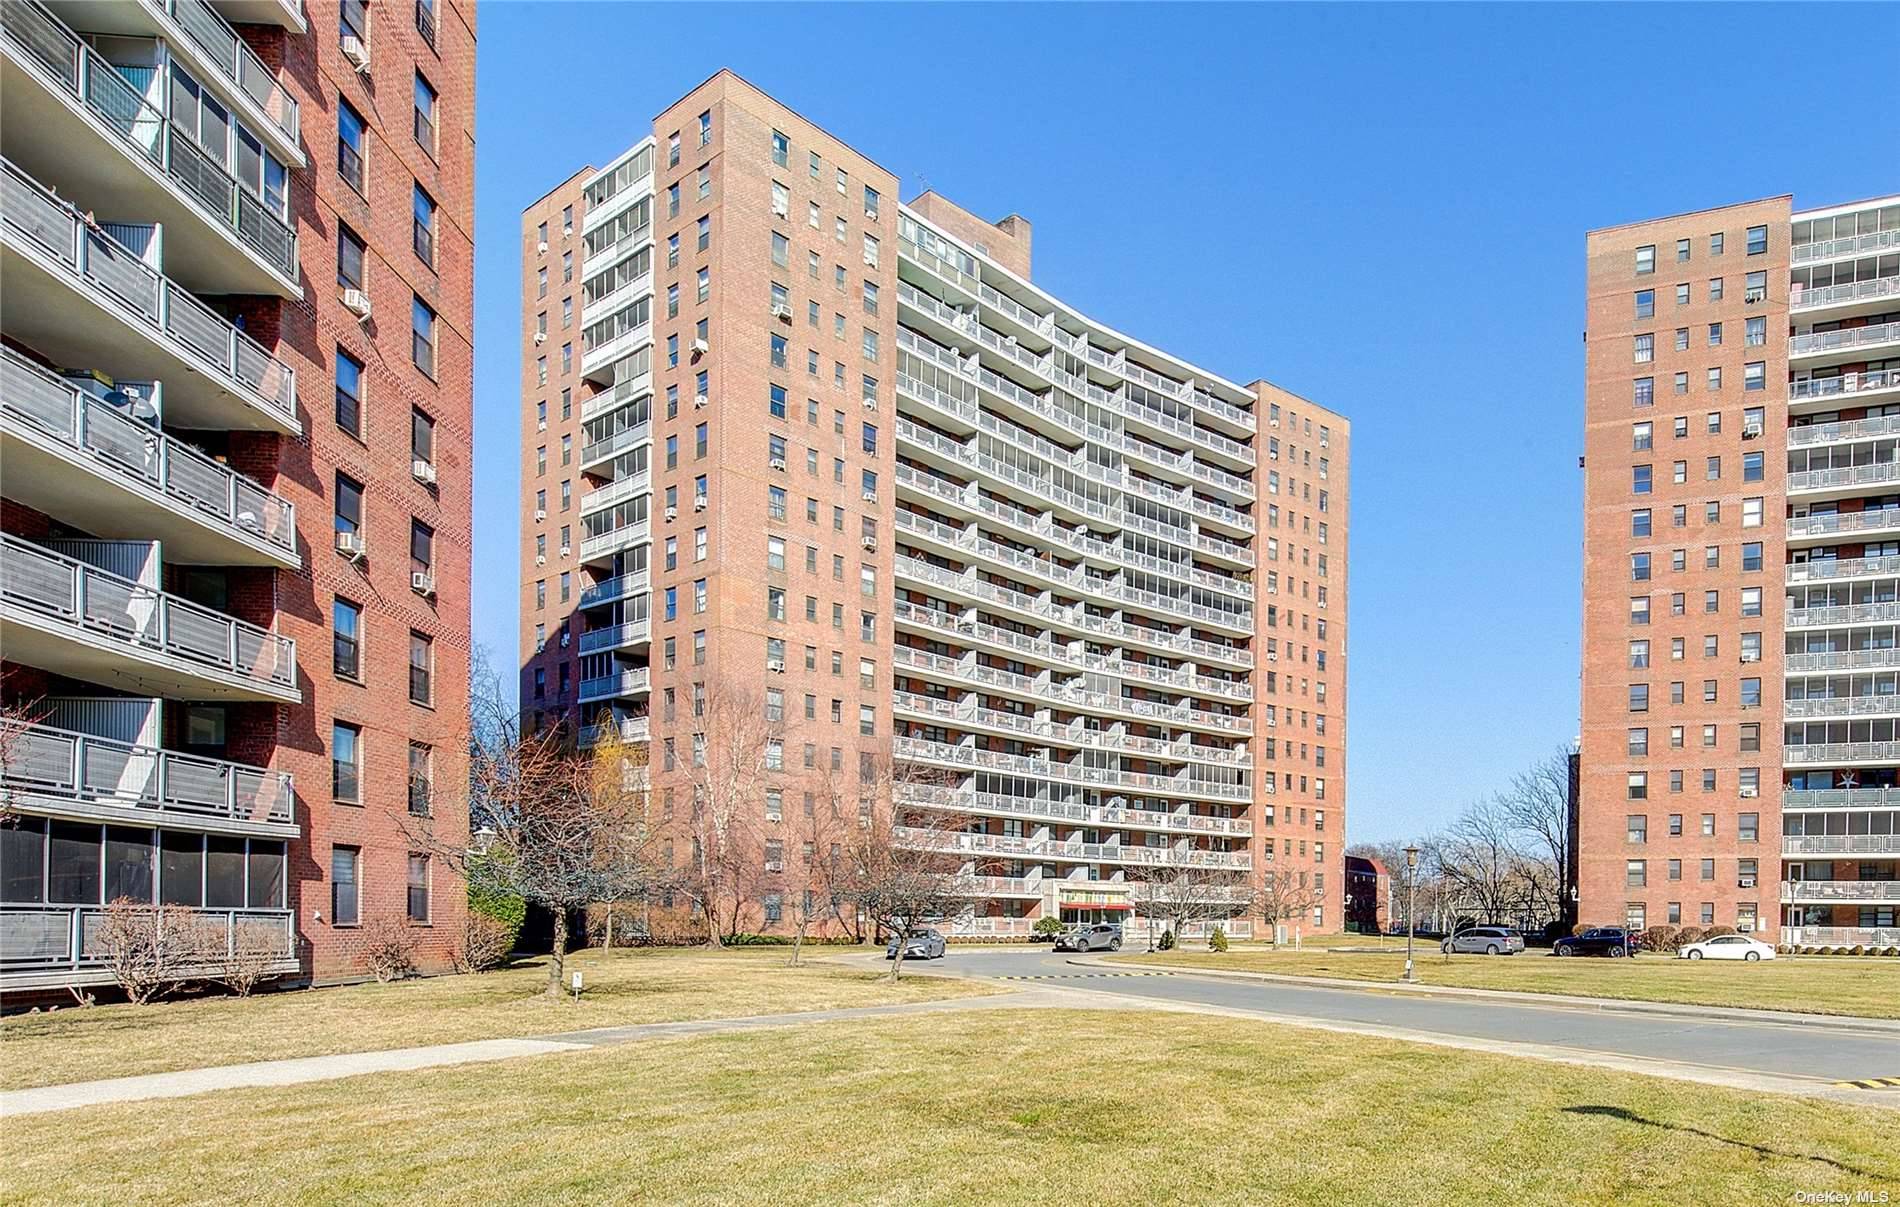 Luxury hi rise 16 hour doorman building large 2 bedroom with balcony in excellent condition corner unit very private neighbor on one side unobstructed Manhattan view 24 hour security gate ...